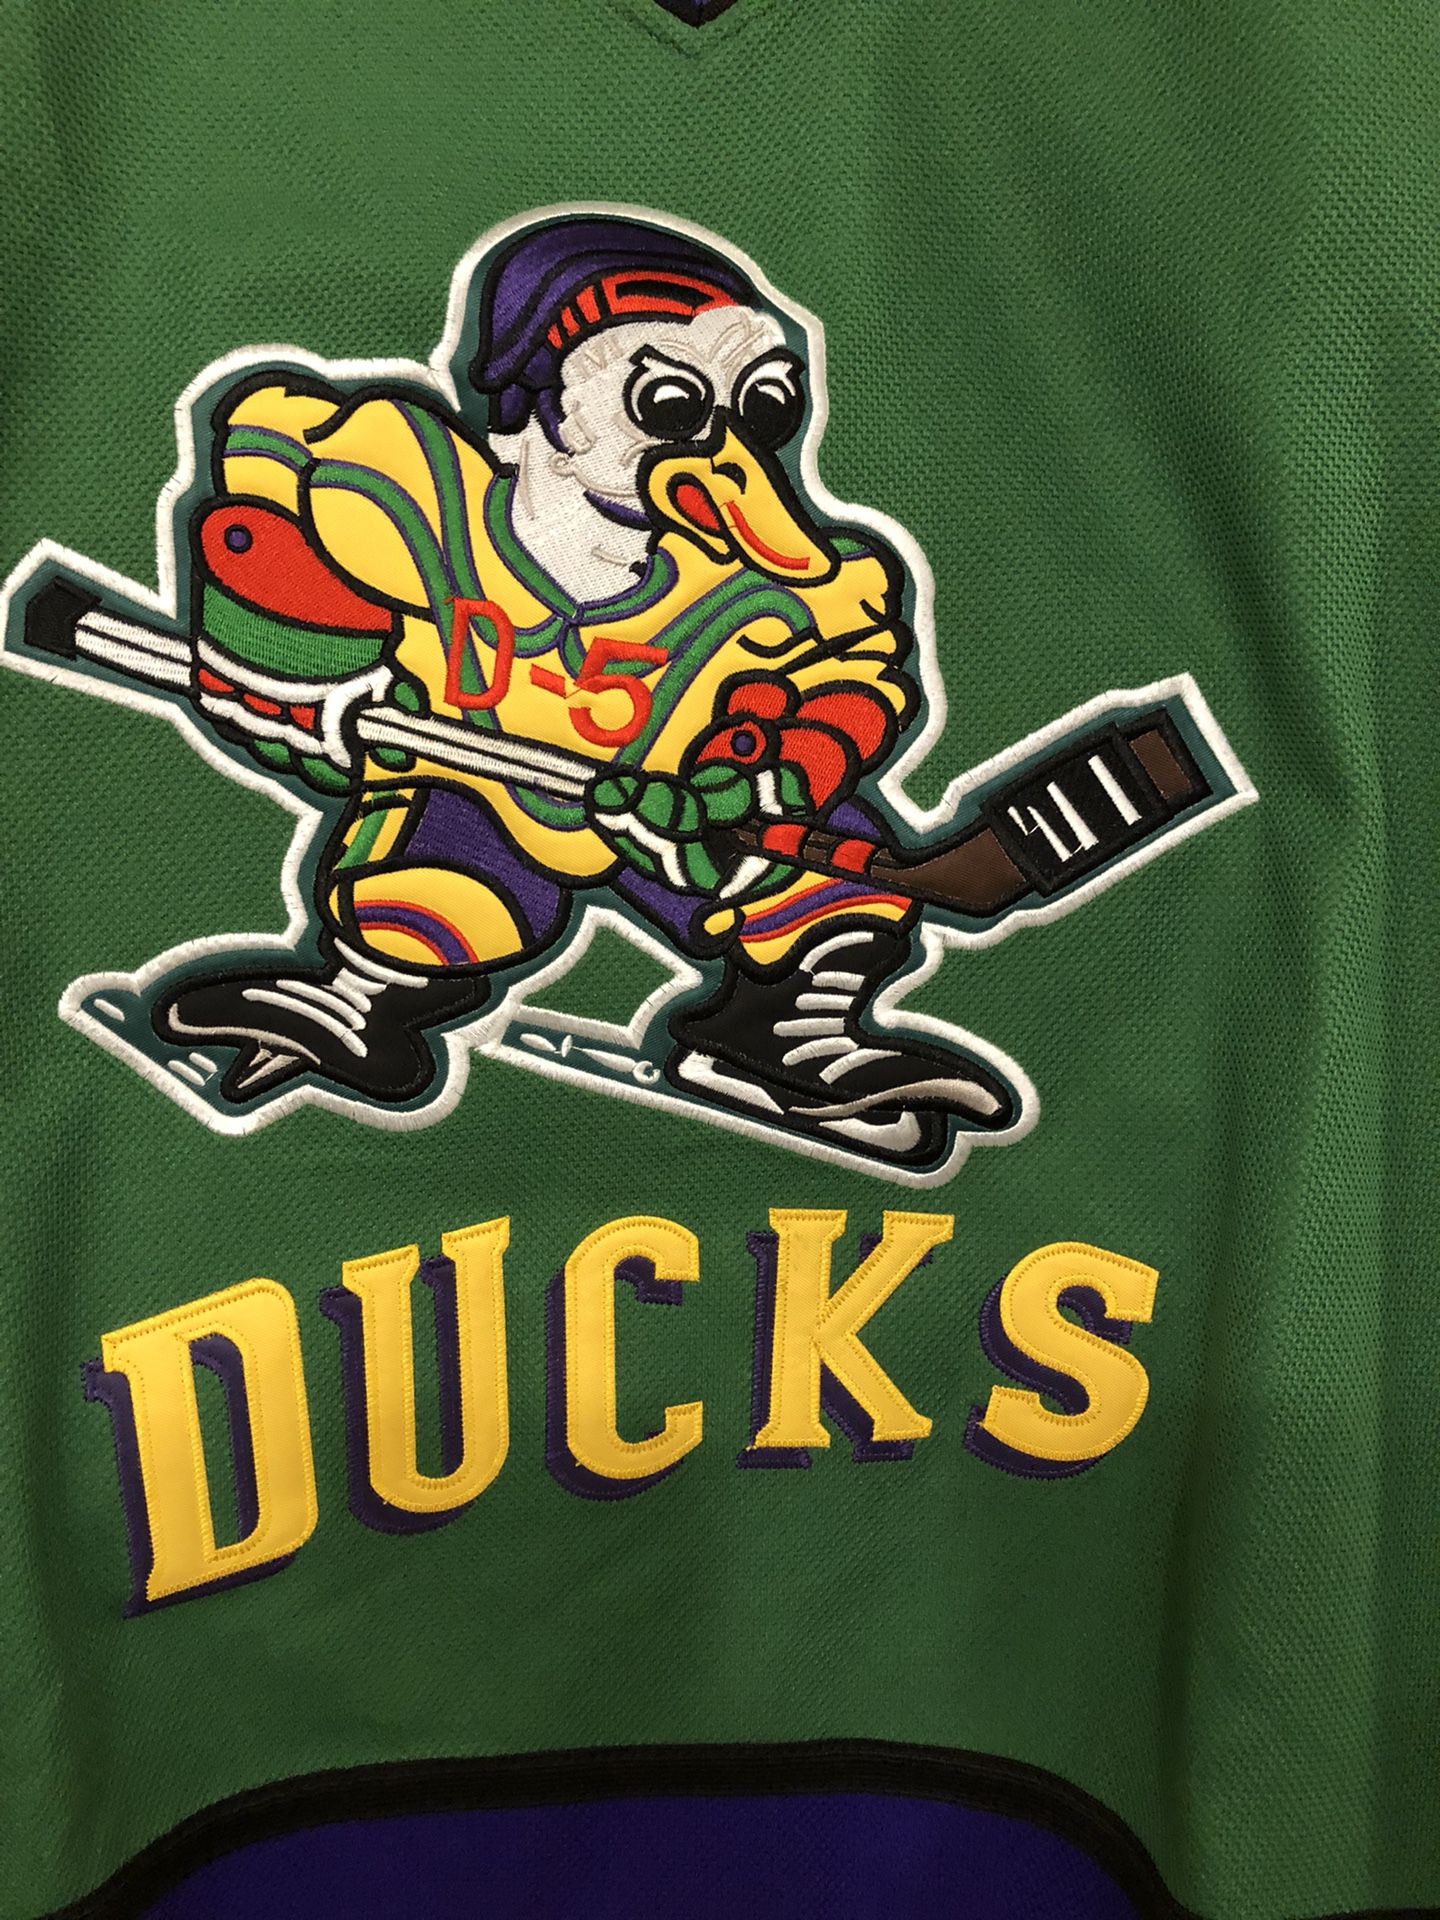 The Mighty Ducks “Adam Banks” Jersey #99 Size Large for Sale in Gulfport,  MS - OfferUp